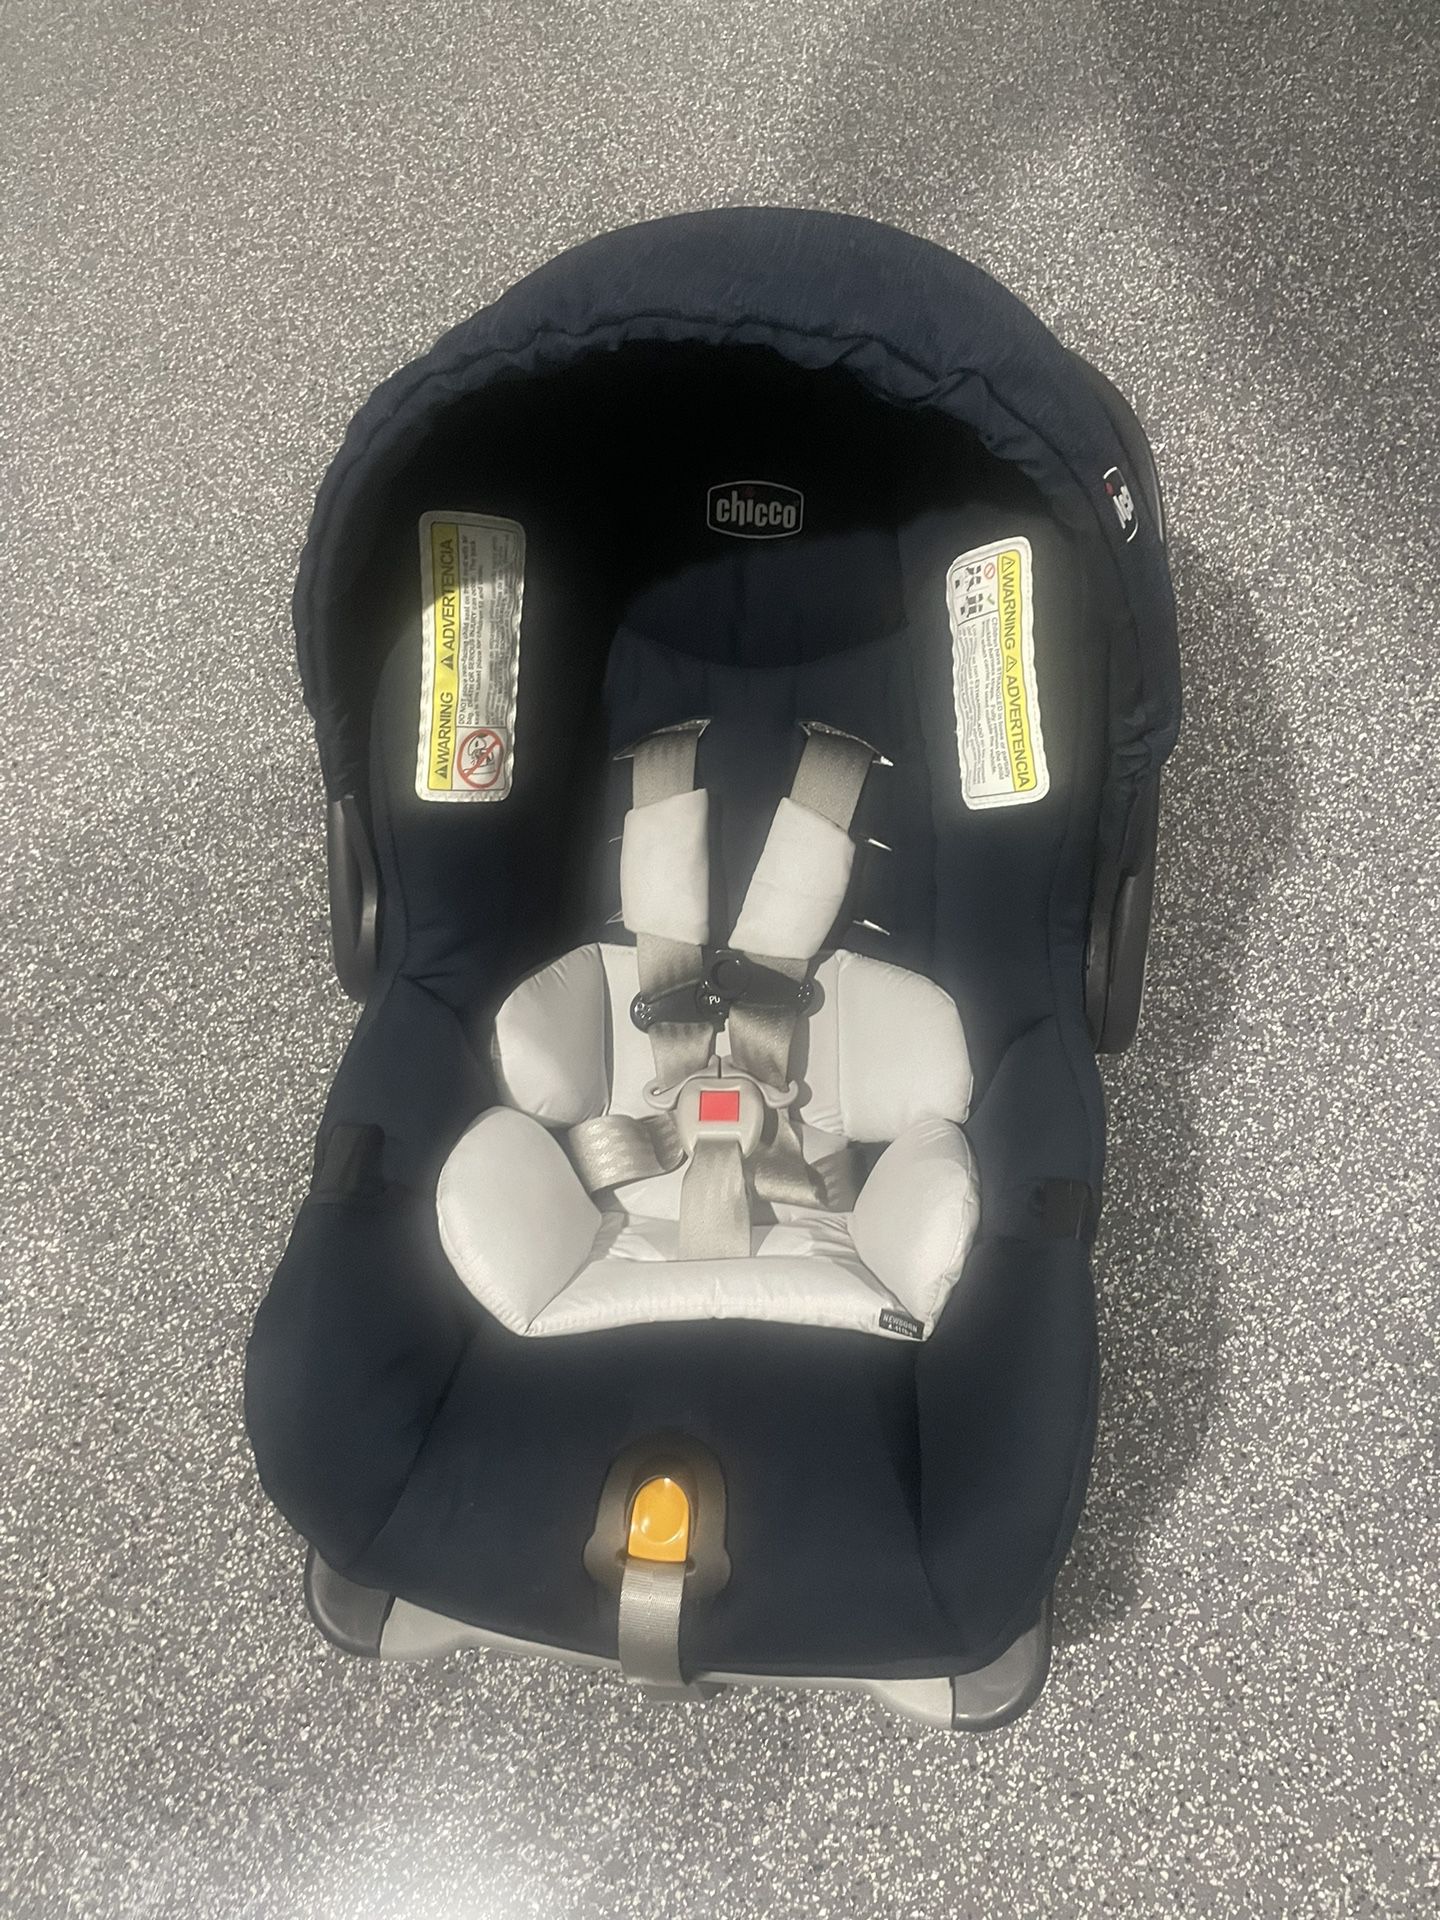 Chicco bravo 3 in 1 travel system Brand new - barely used  Stroller and infant car seat  (contact info removed)